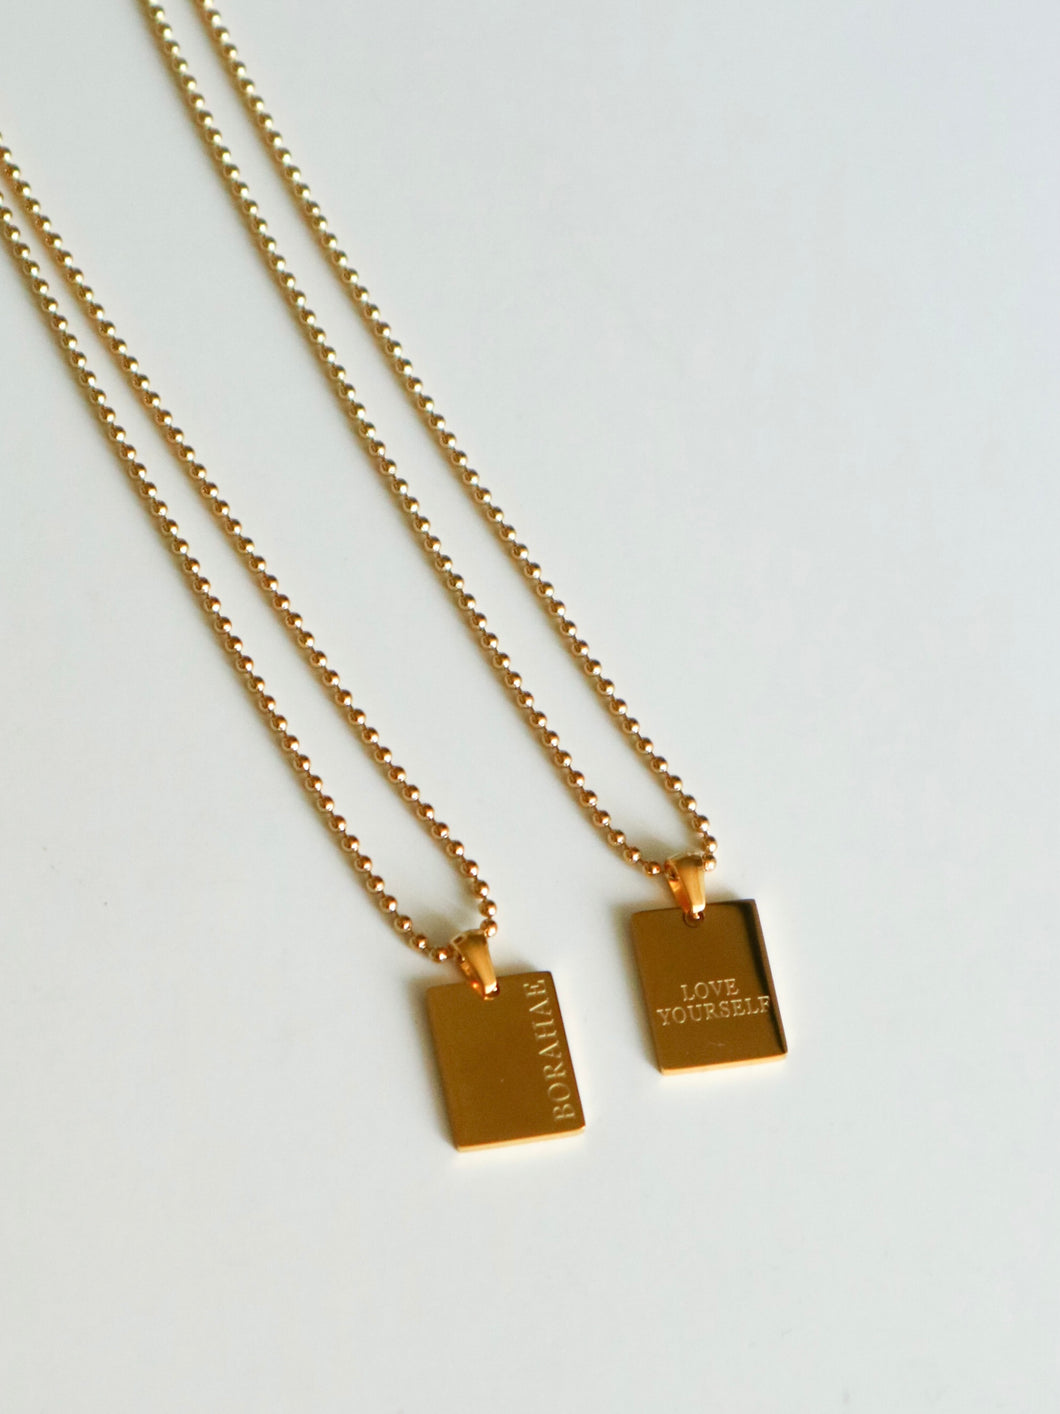 KPOP BTS ARMY Necklace